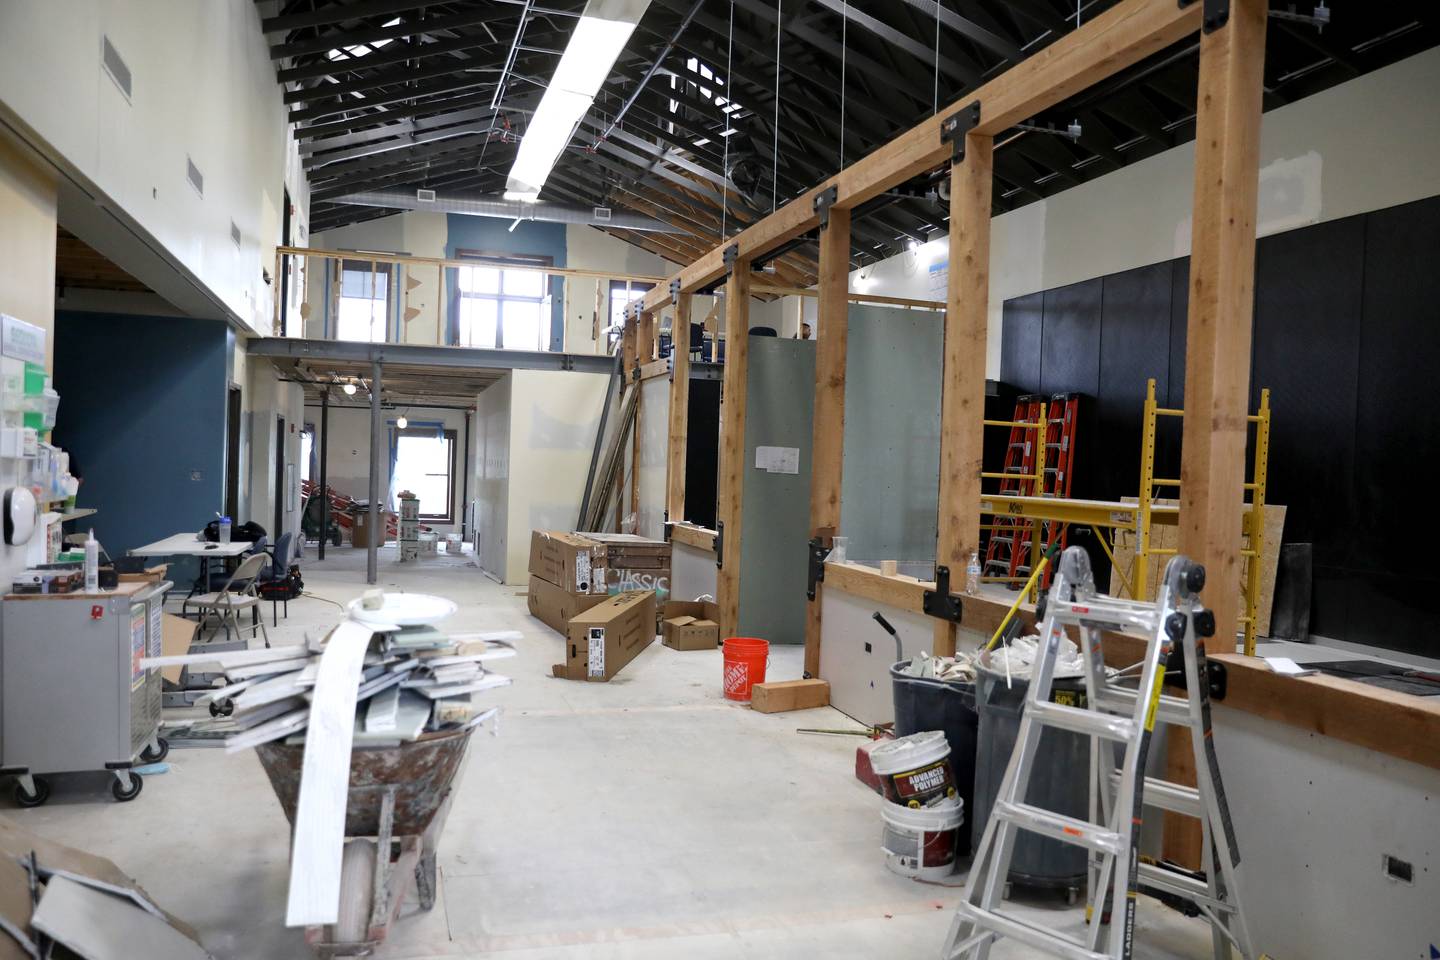 Construction is underway at Sturdy Shelter Brewery in downtown Batavia.